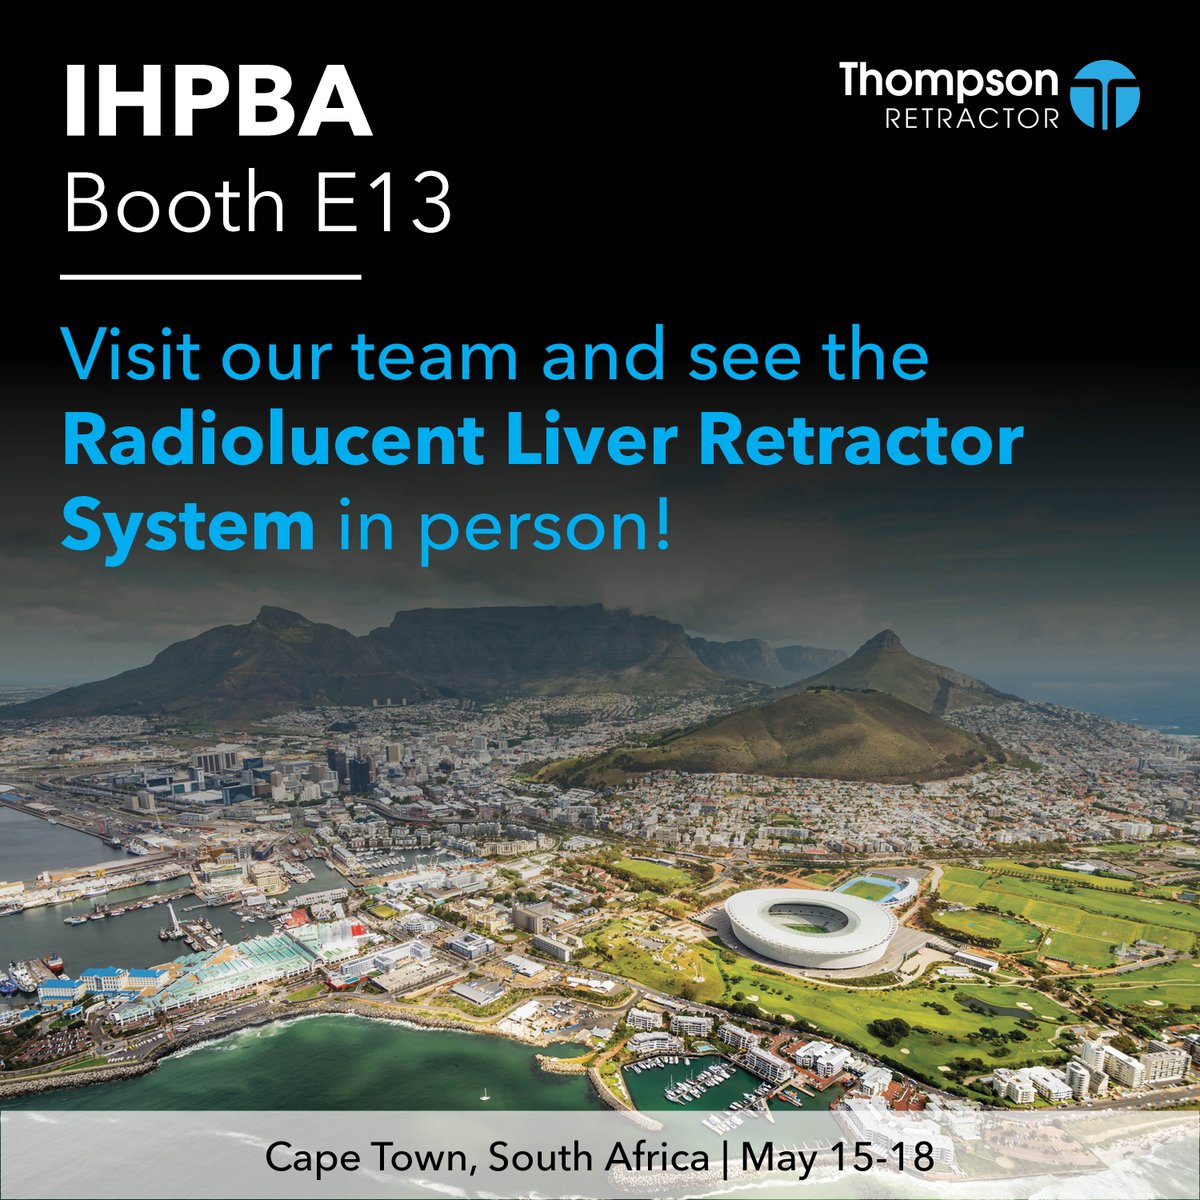 What an incredible opportunity to visit South Africa and connect with our global community! We'll be in Cape Town for the 16th IHPBA 2024 World Congress. Stop by, say hi, and get hands-on with the Liver Retractor System! #thompsonretractor #IHPBA24